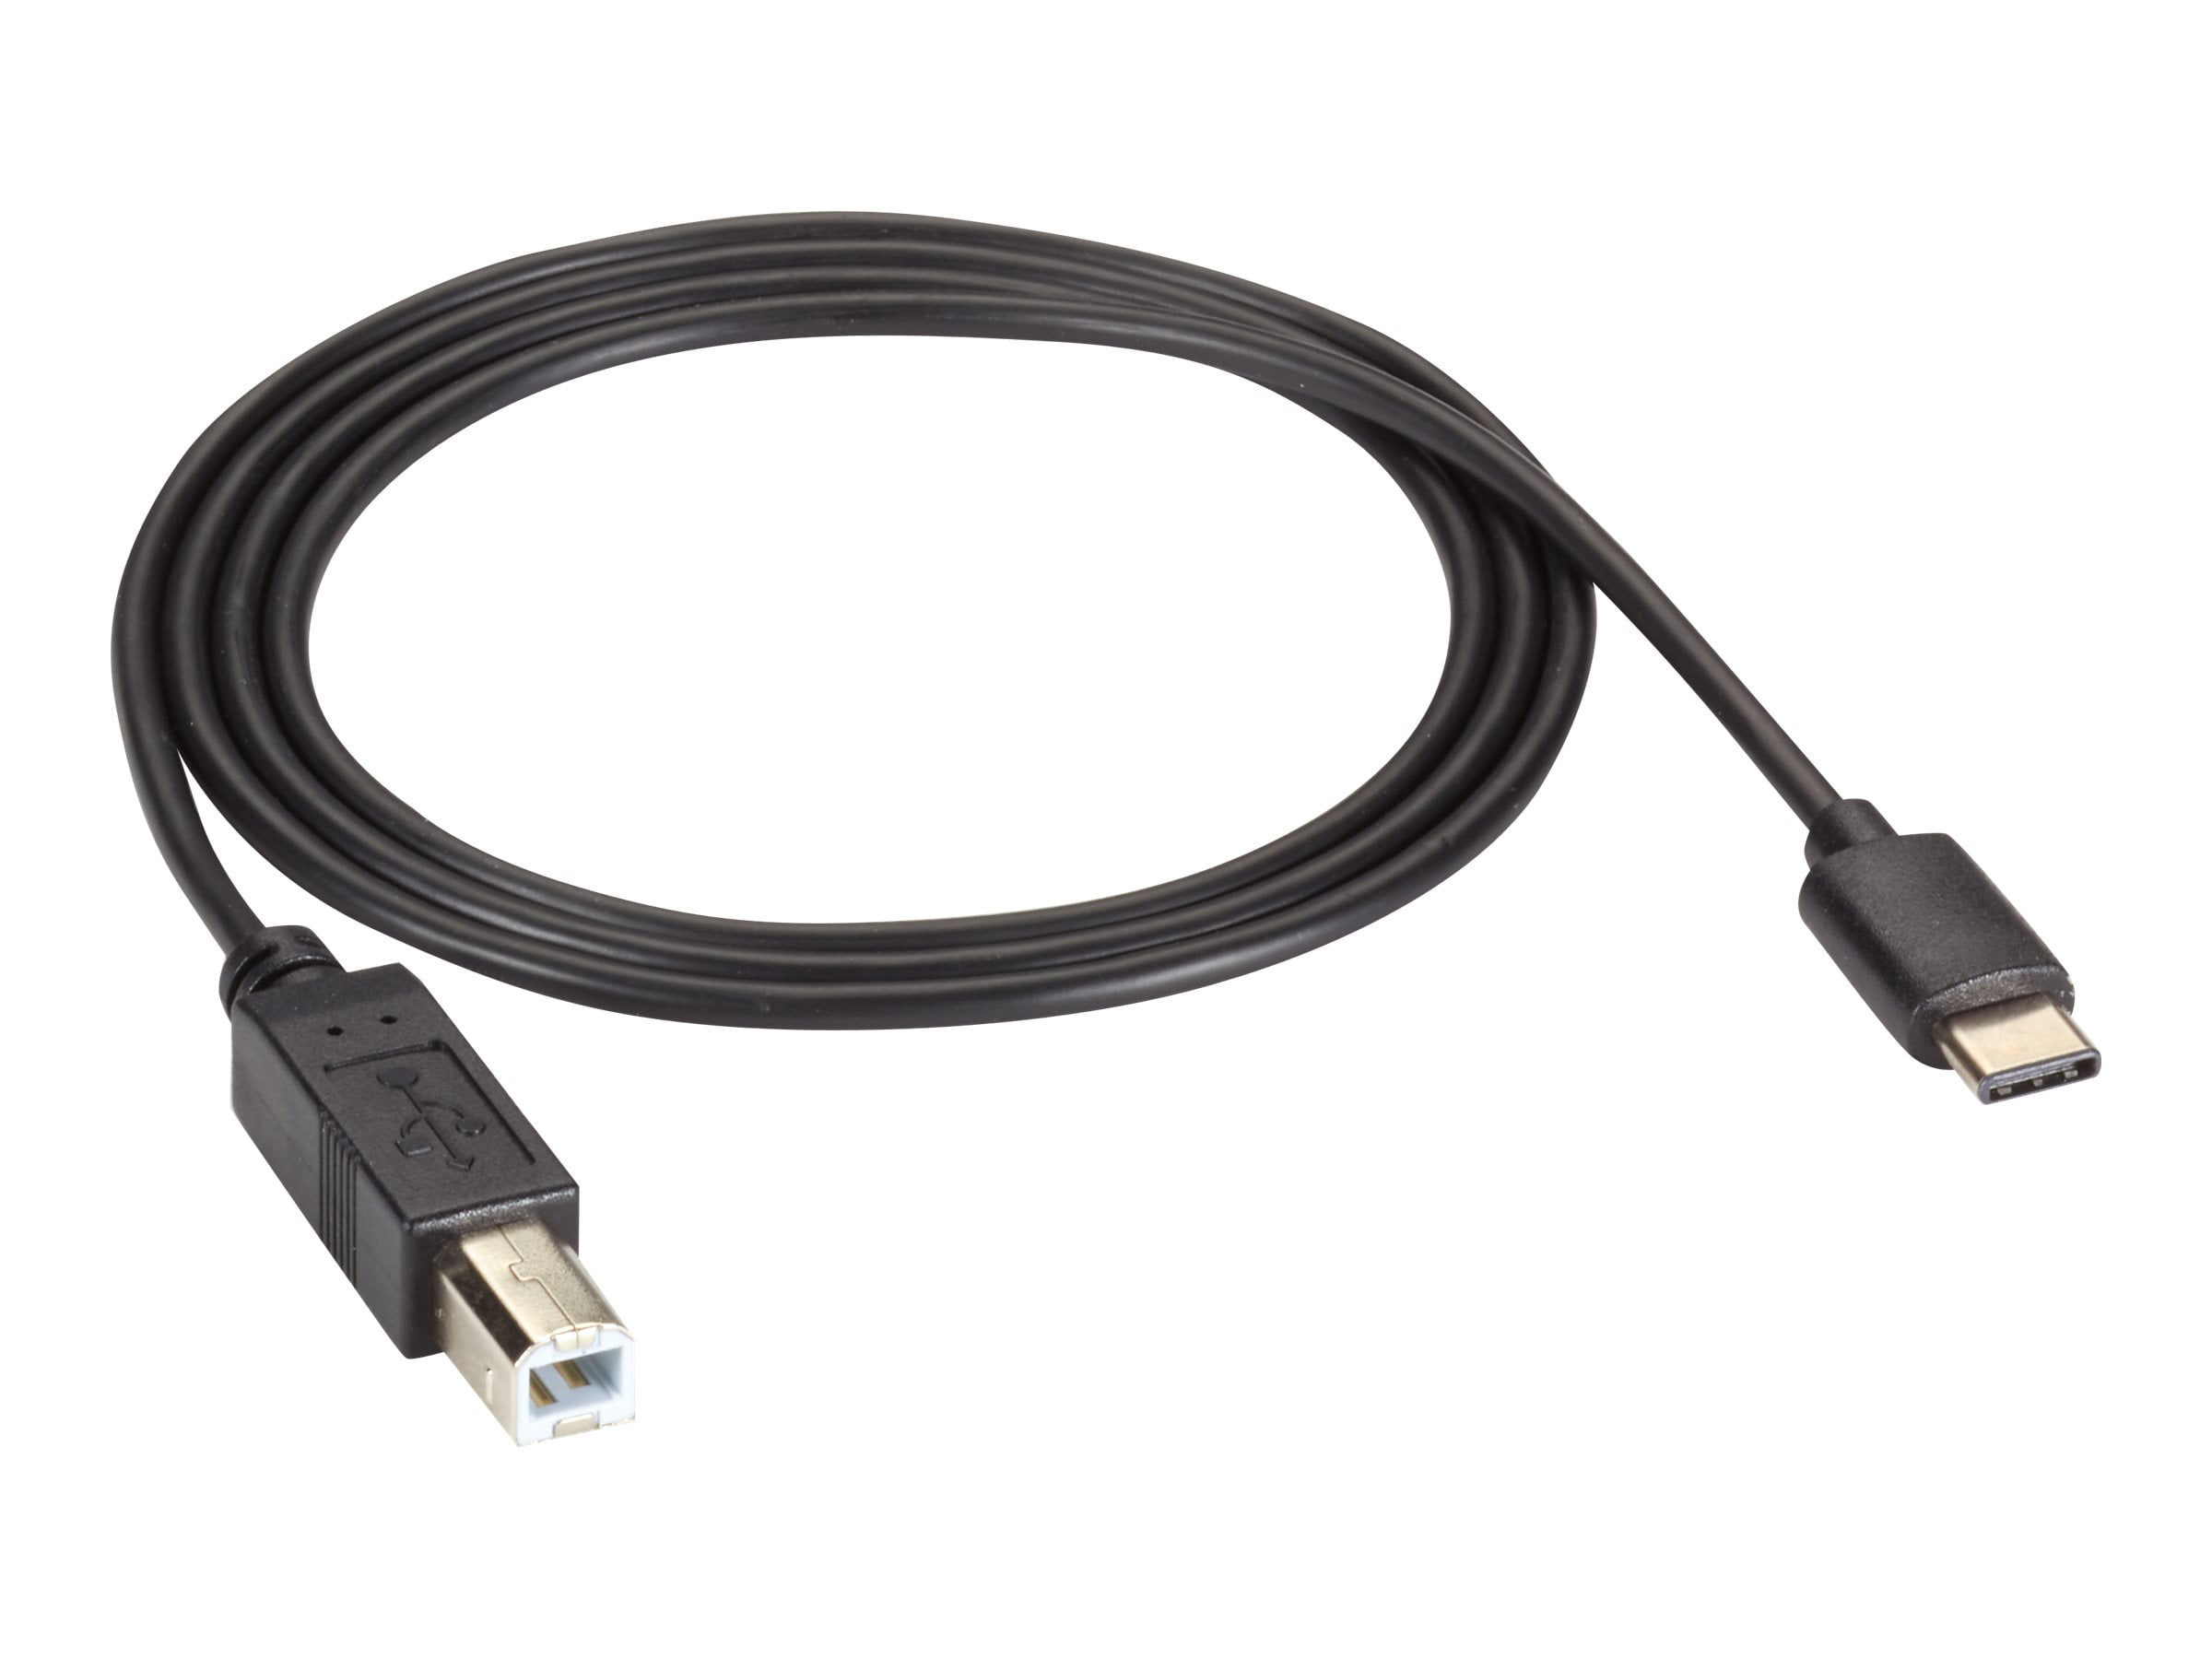 Cable Length Black Computer Cables USB 2.0 A Type Male to Female Extension Adapter Down & Up Angled 90 Degree Reversible Design 1PCS 